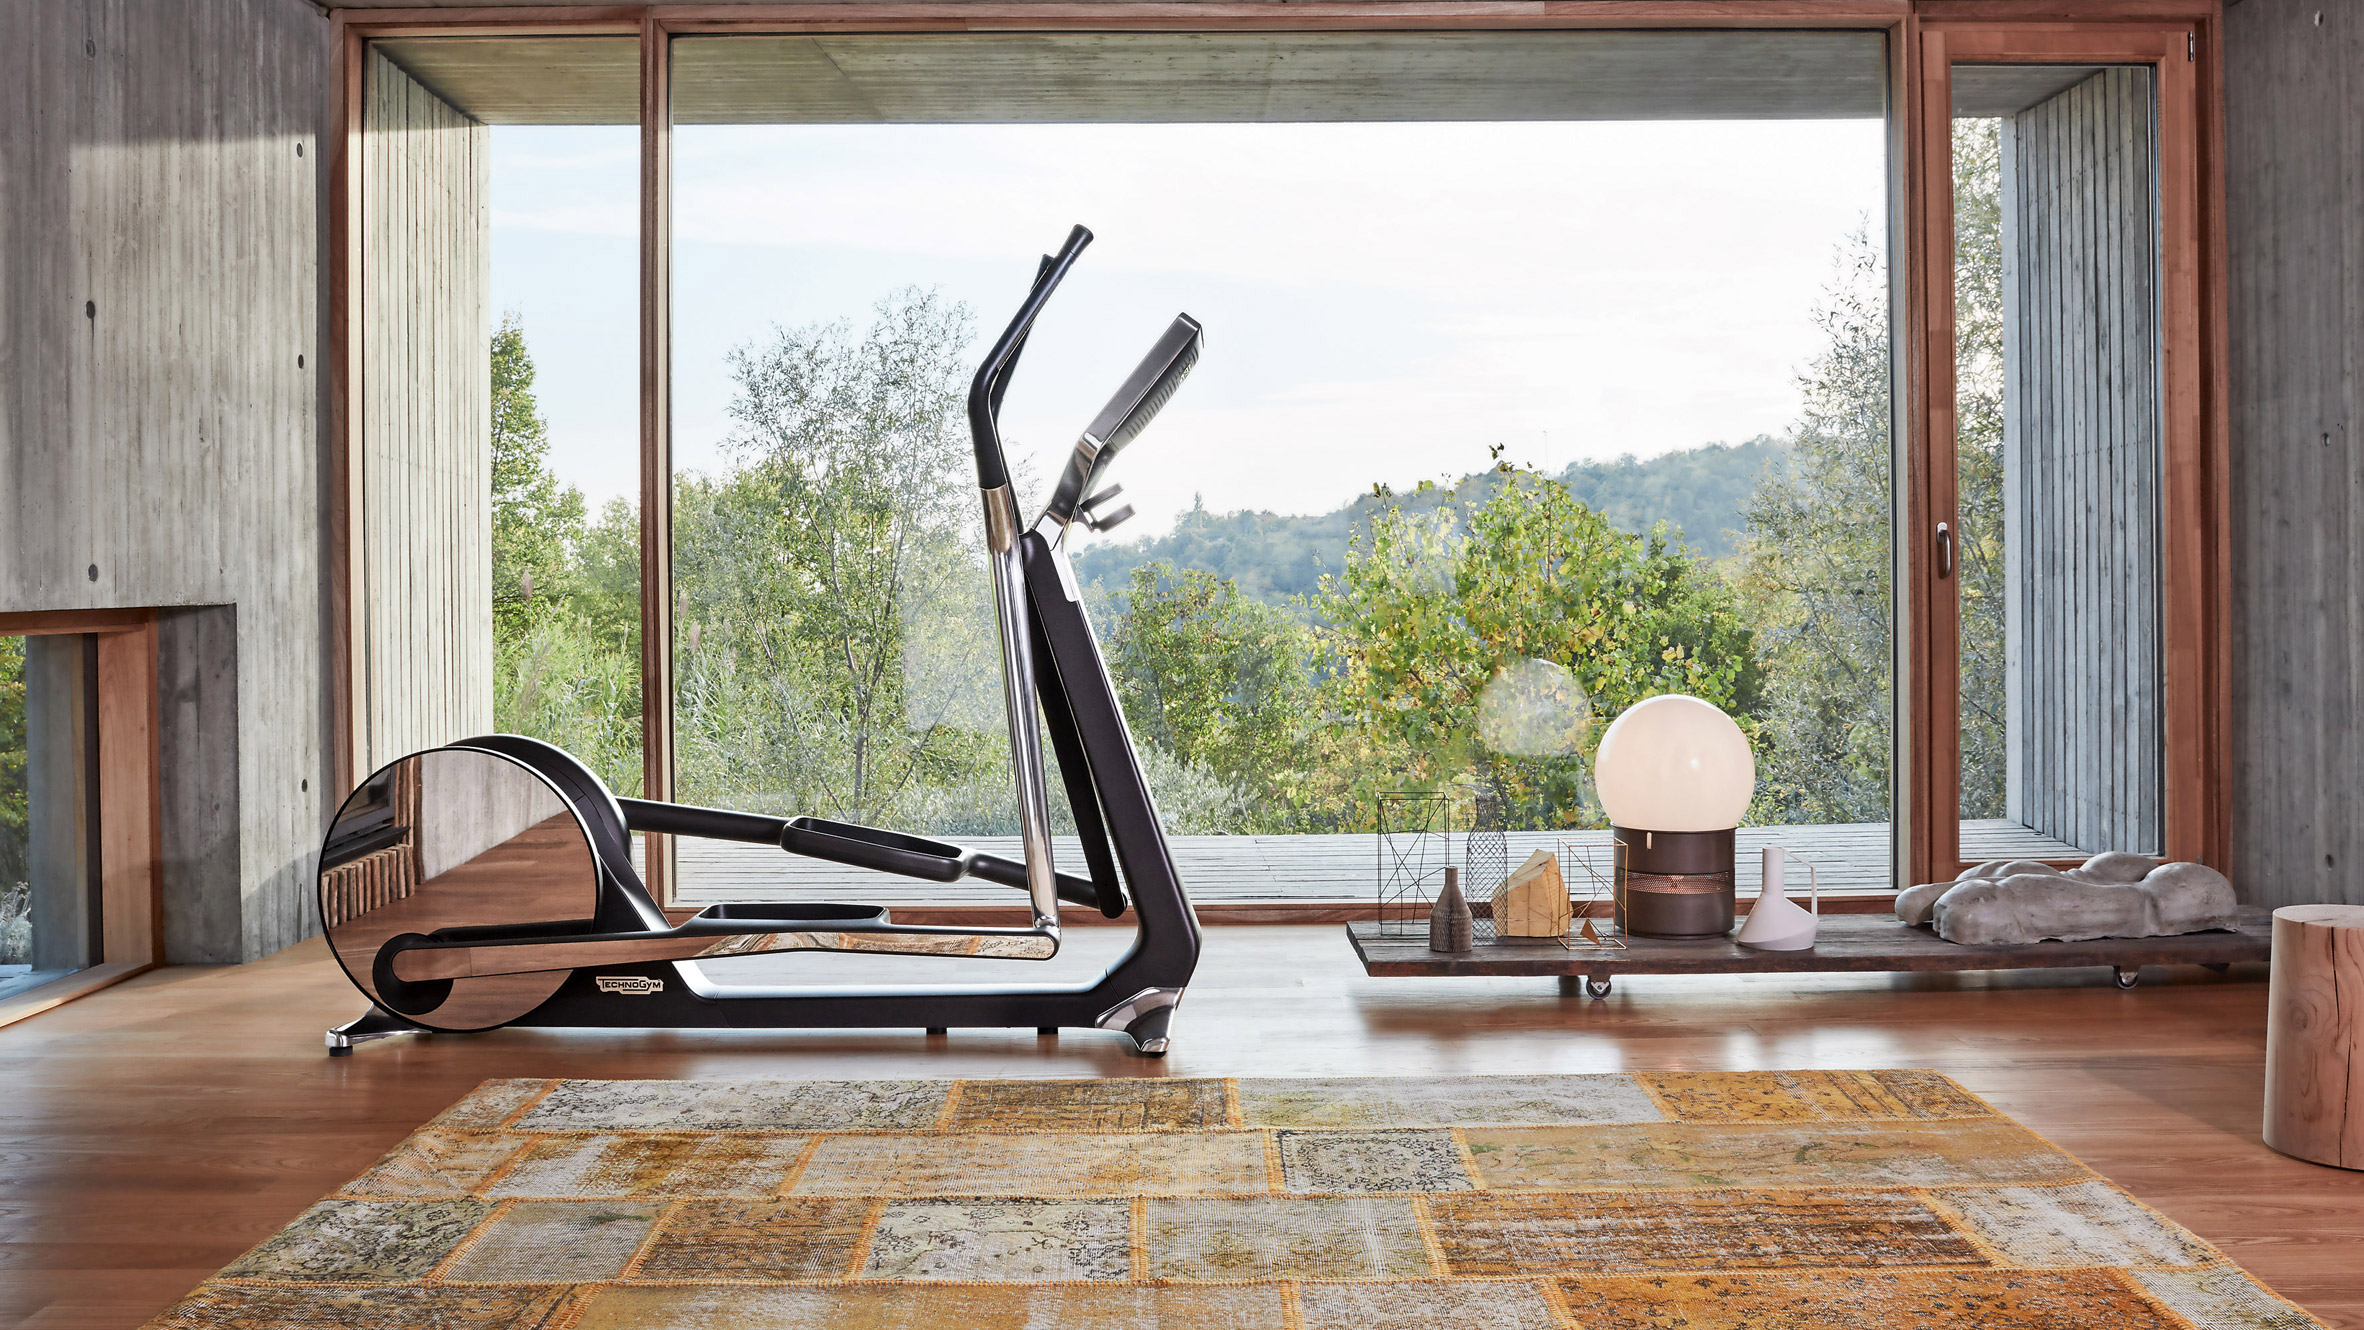 Louis Vuitton has just launched the most luxurious gym equipment